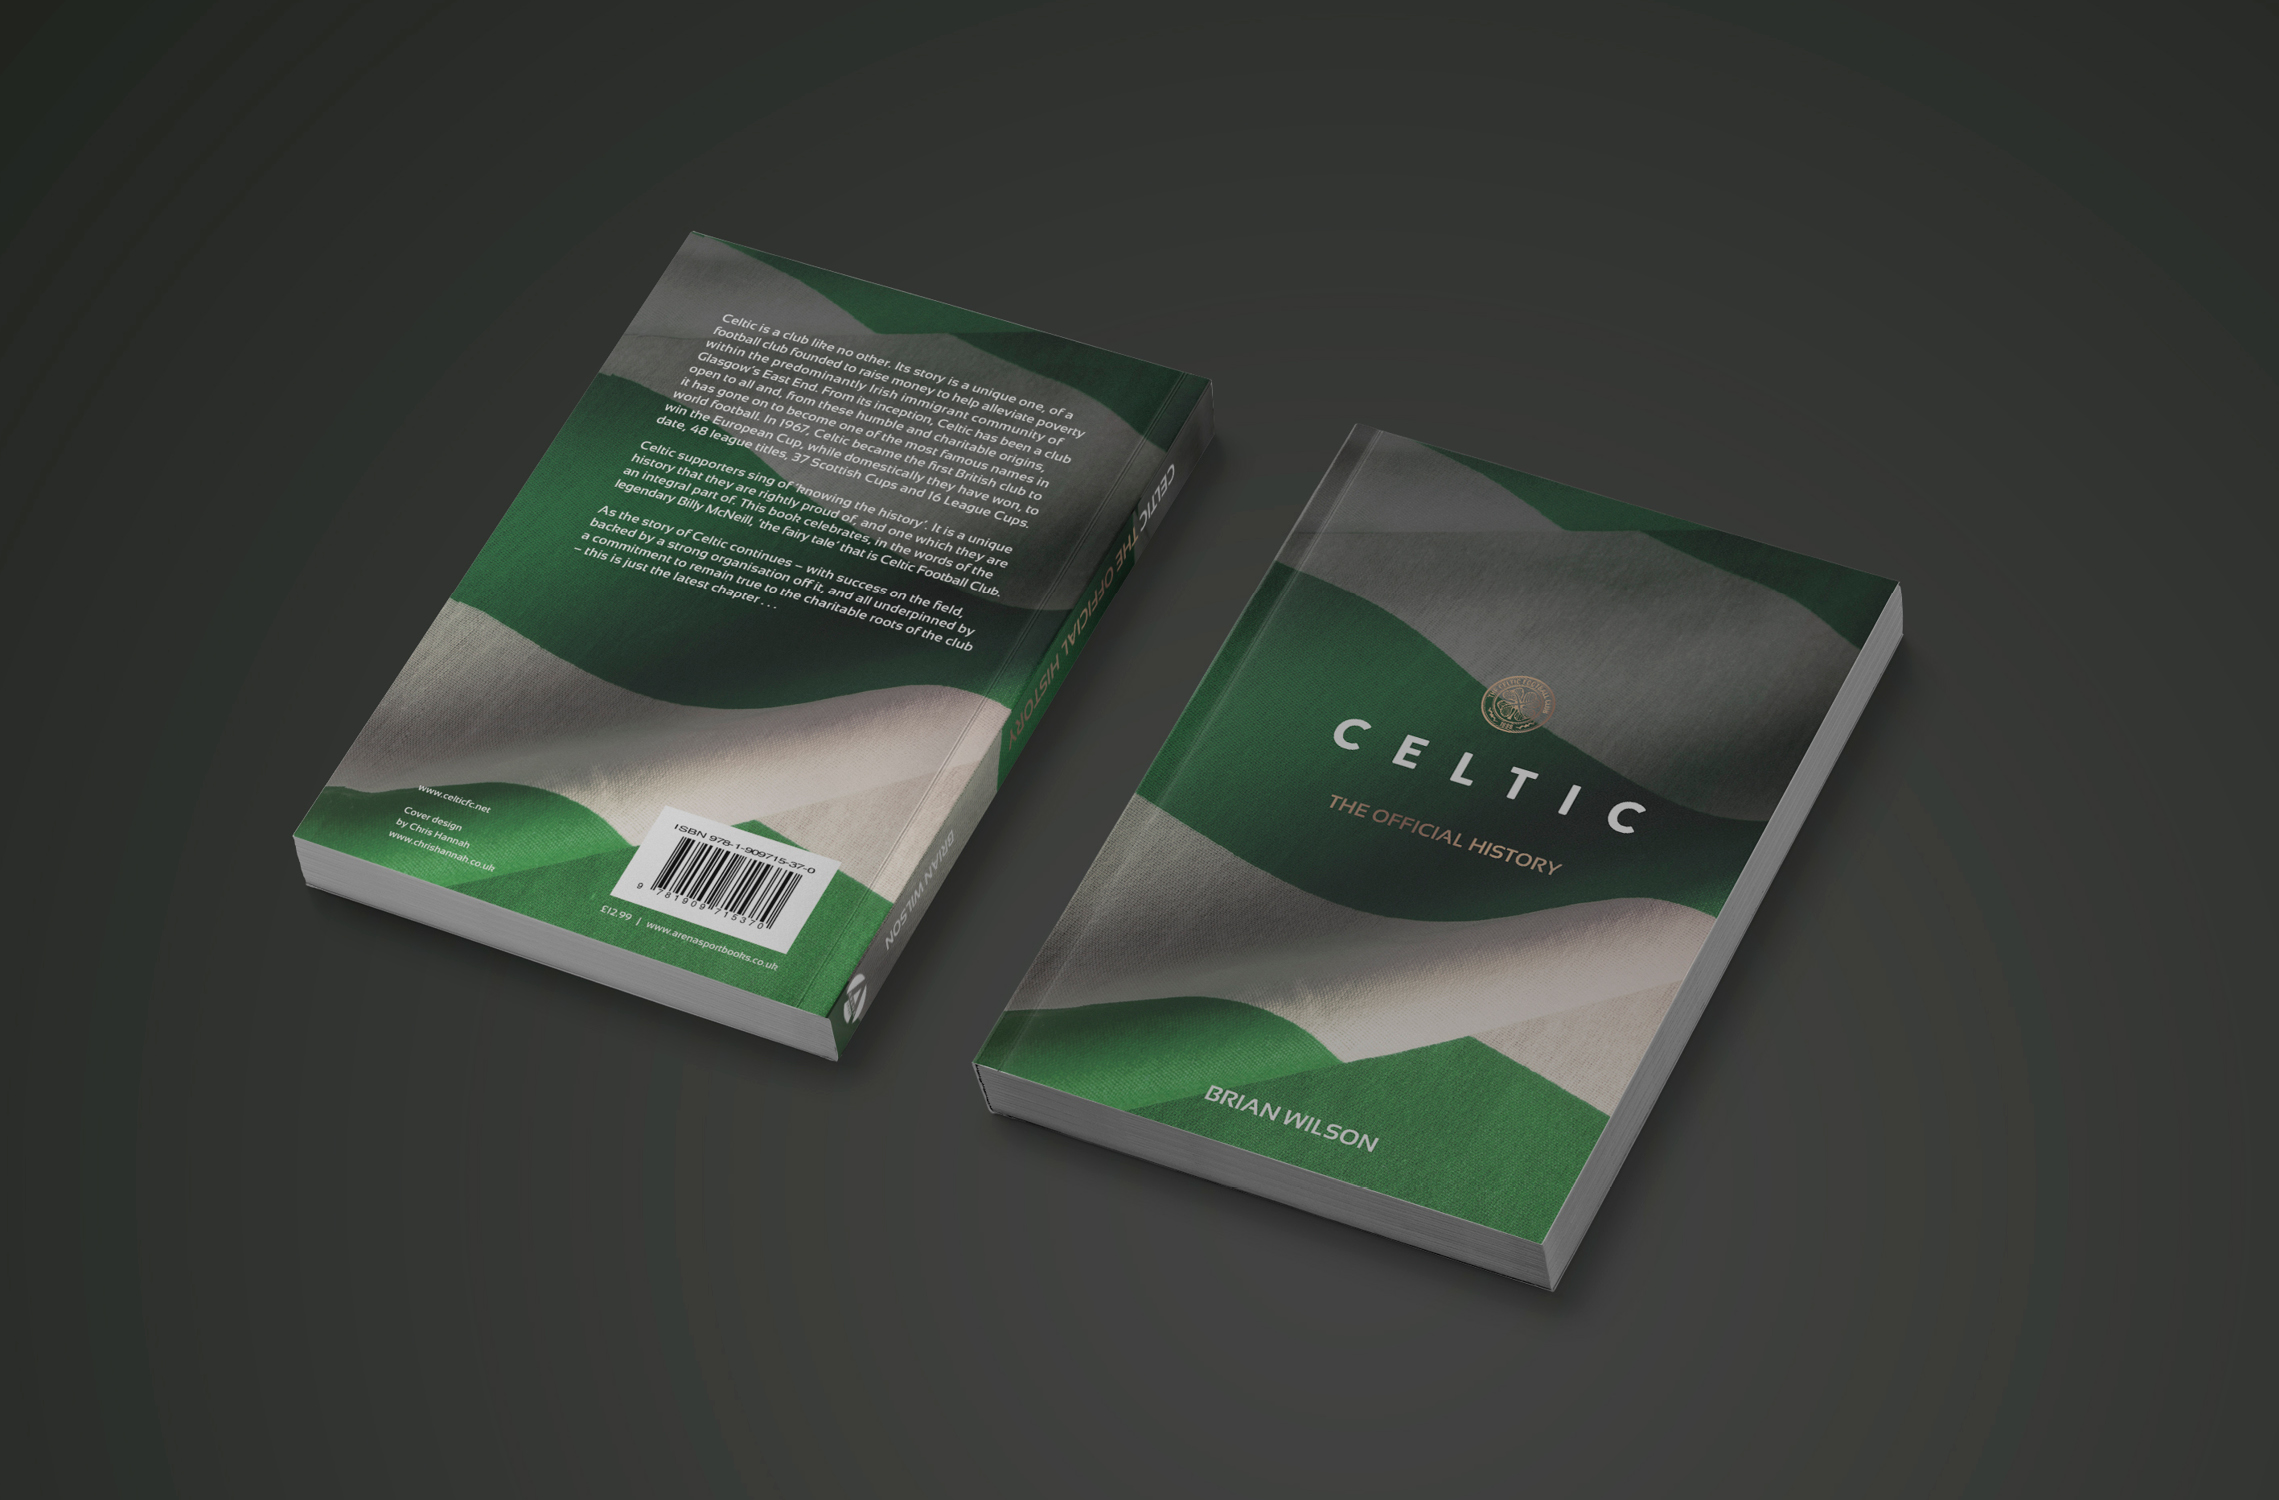 Celtic Official History Book Cover Design